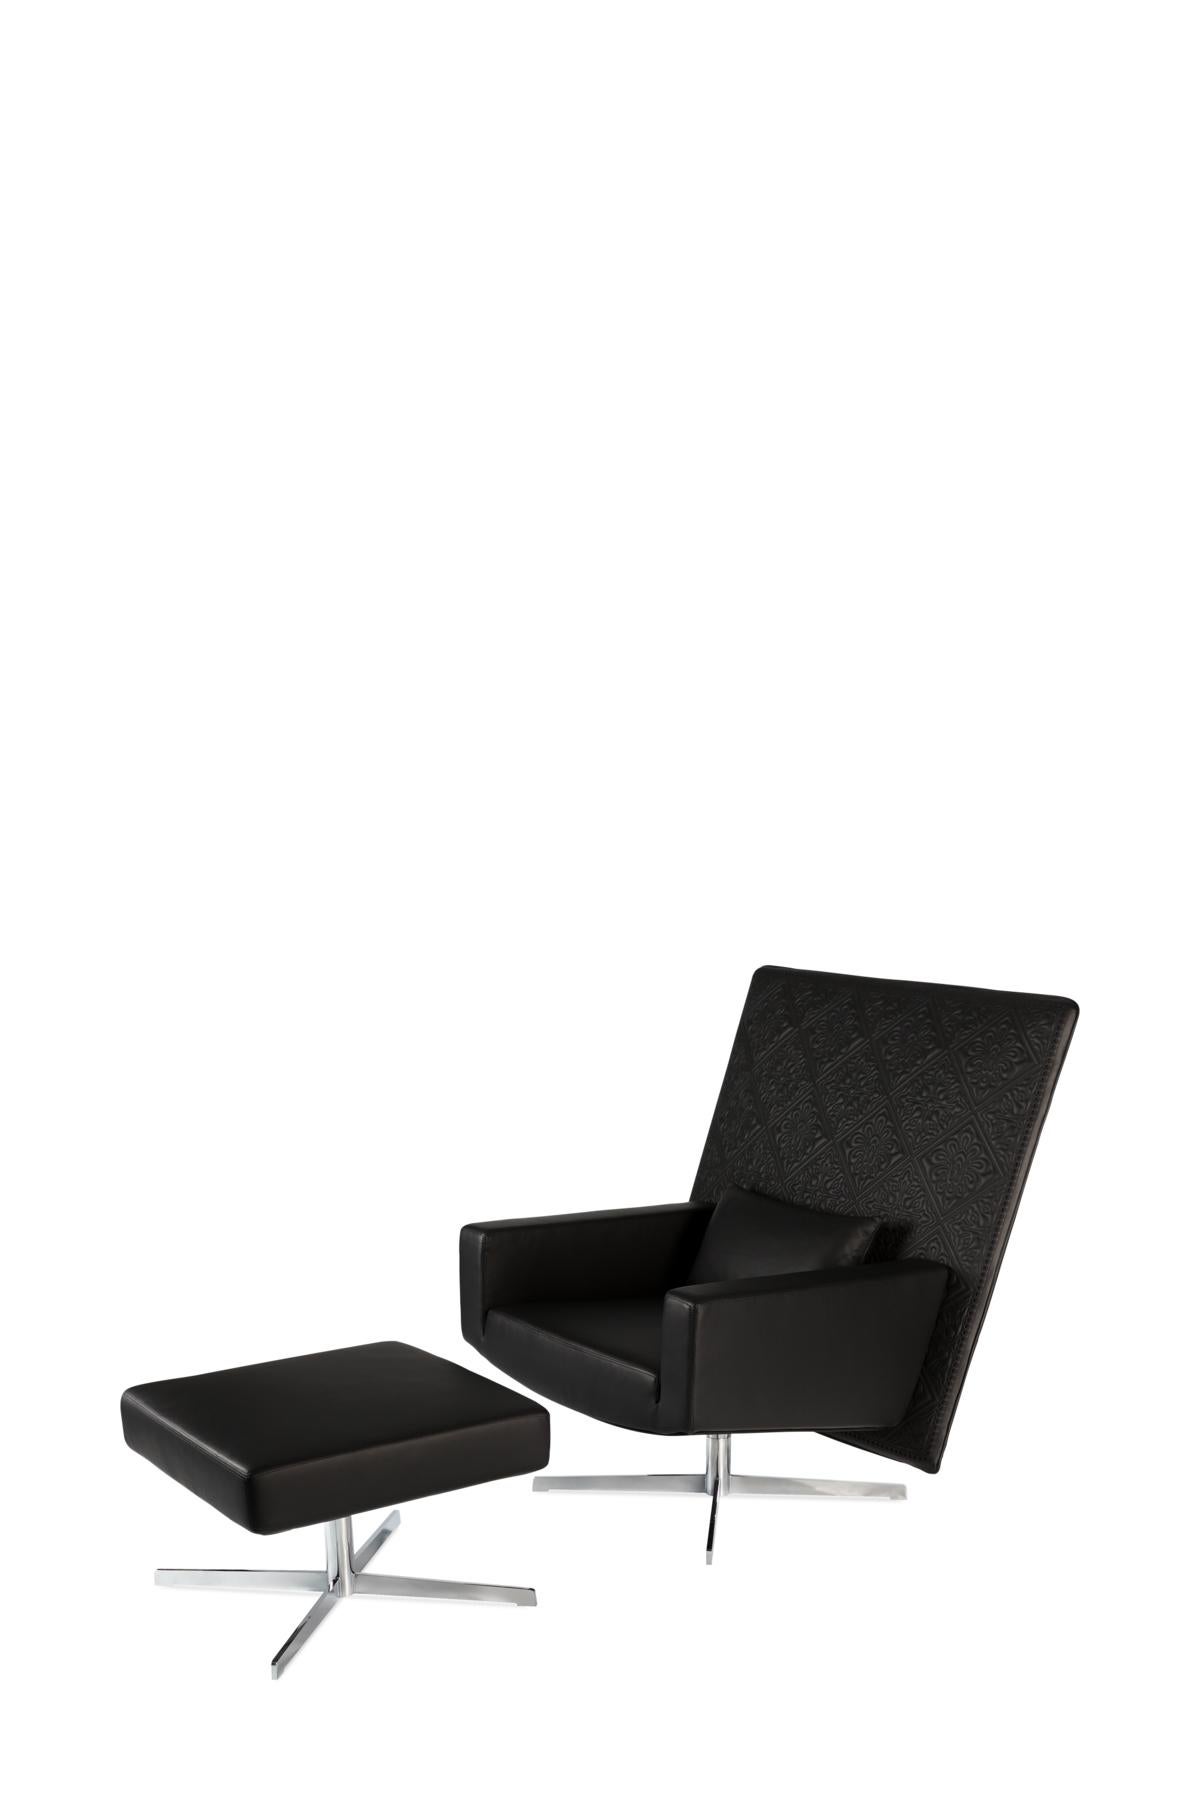 Dutch Moooi Jackson Chair in Black Leather Embroidery Upholstery with Steel Frame For Sale